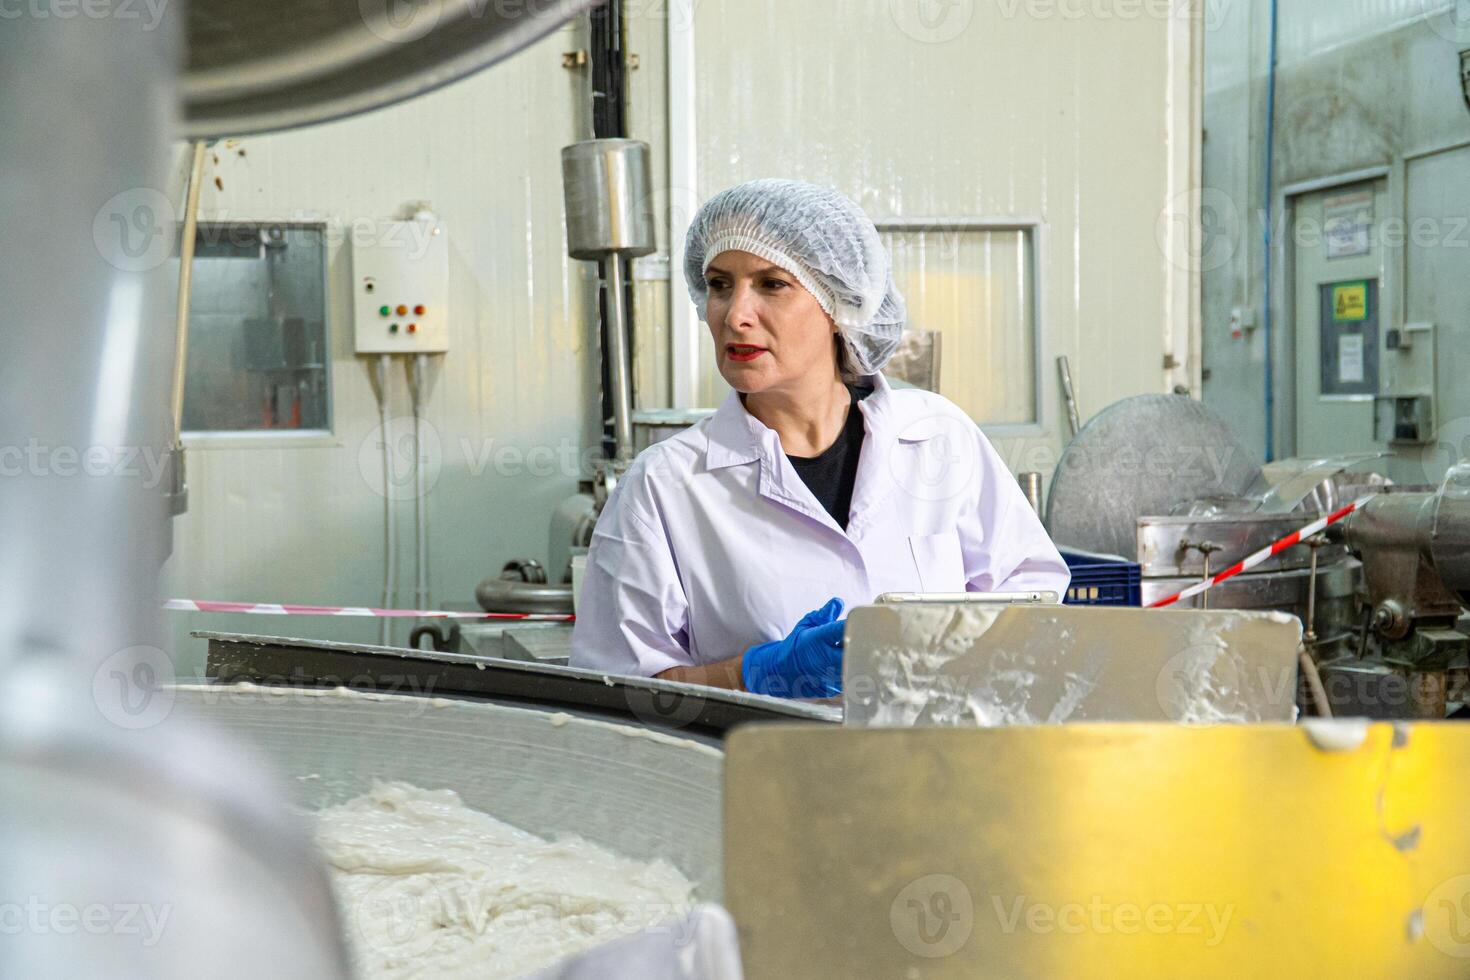 caucasion woman working in a food factory wearing protective clothes and gloves. photo